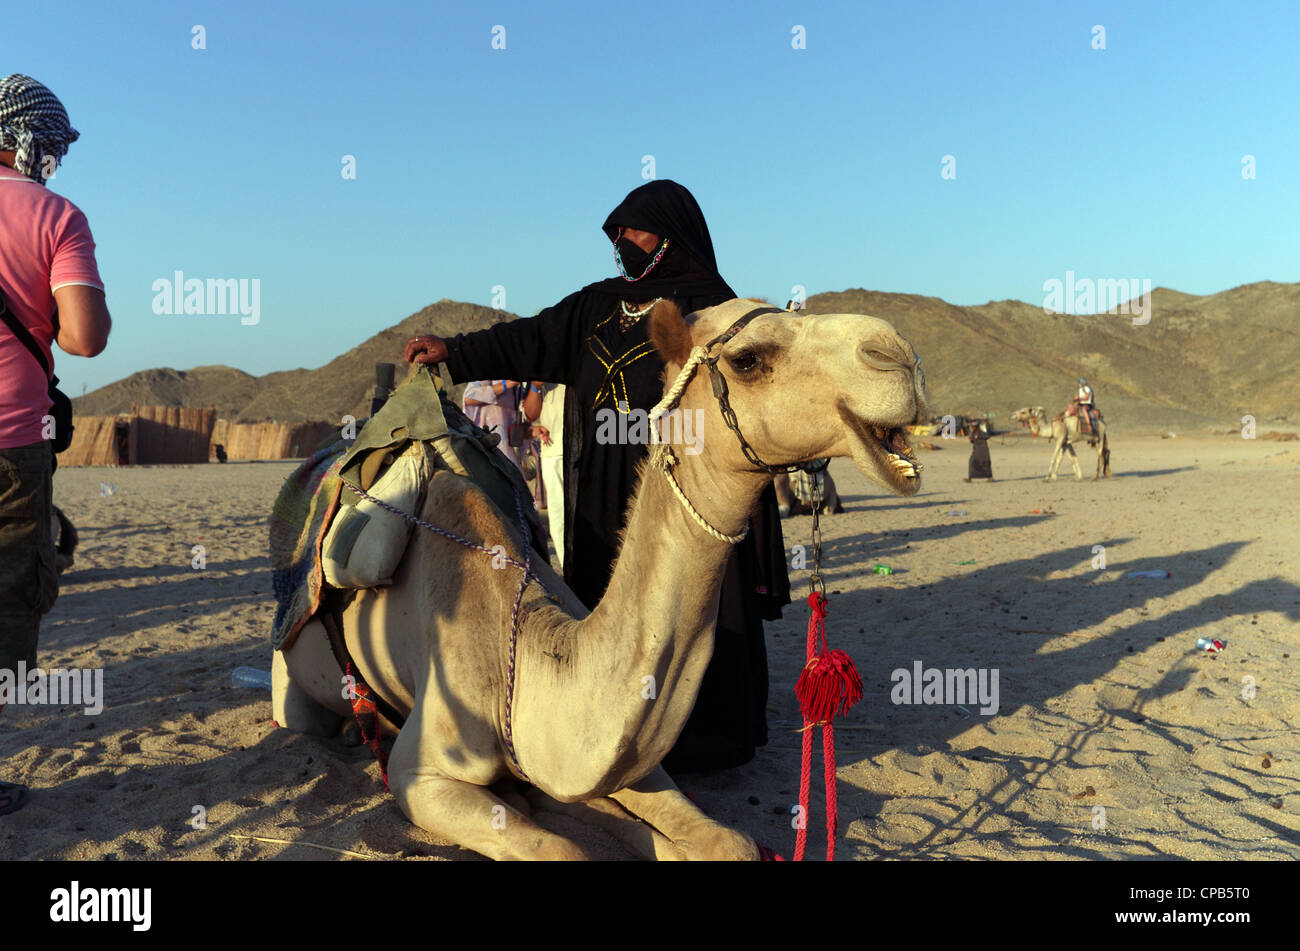 Bedouin woman guide in traditional clothing leads tourists riding camels in desert. Bedouin village about Hurghada Egypt Africa Stock Photo